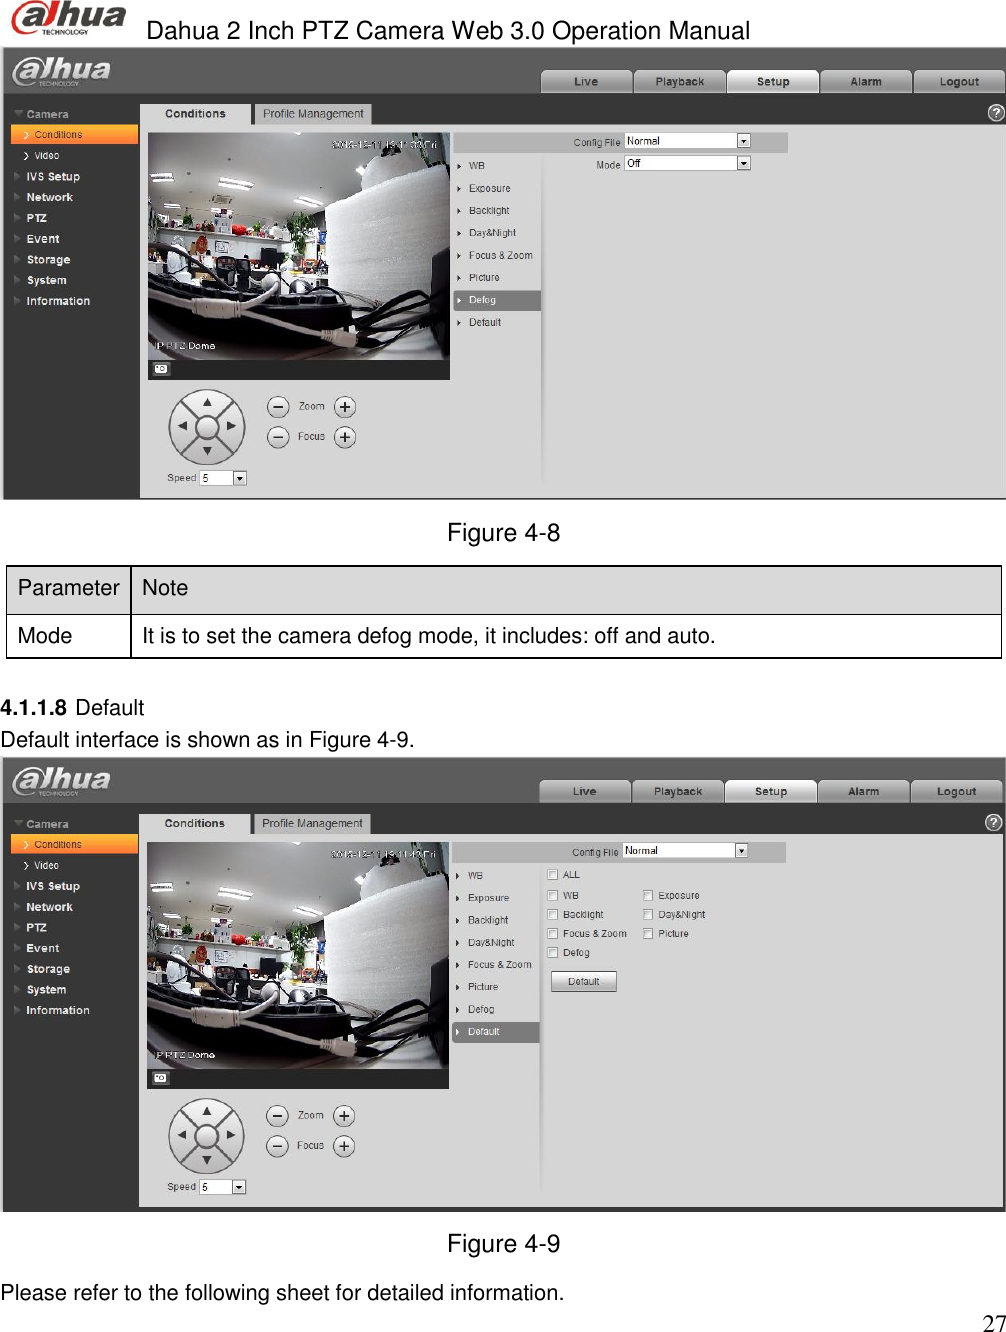  Dahua 2 Inch PTZ Camera Web 3.0 Operation Manual                                                                             27  Figure 4-8 Parameter  Note  Mode  It is to set the camera defog mode, it includes: off and auto.  4.1.1.8 Default Default interface is shown as in Figure 4-9.  Figure 4-9 Please refer to the following sheet for detailed information.  